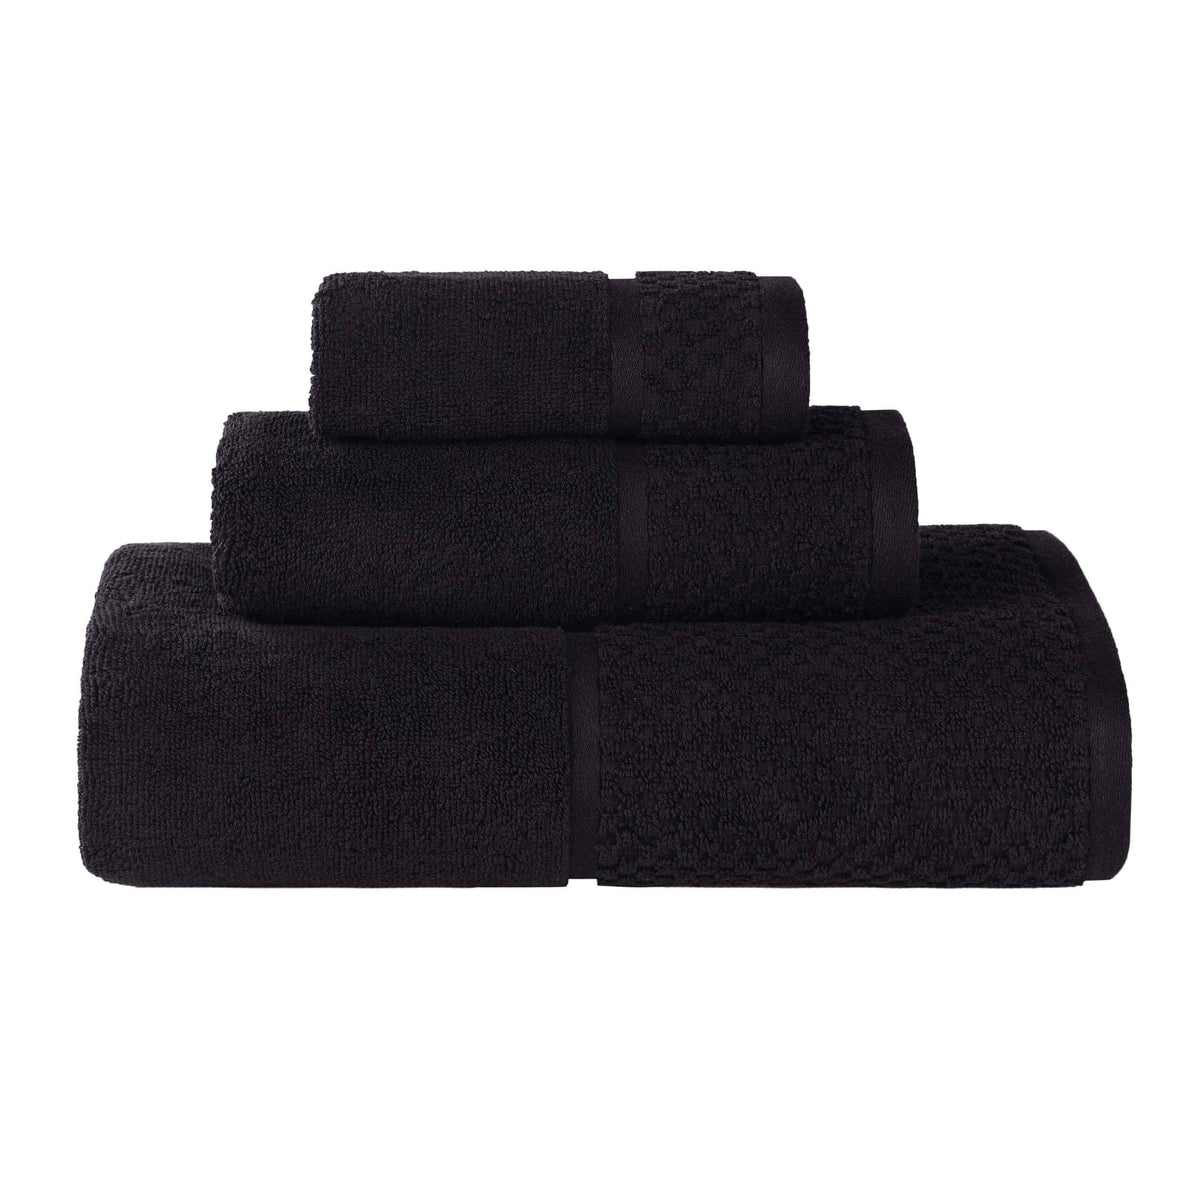 Lodie Cotton Plush Absorbent Jacquard Solid 3 Piece Assorted Towel Set - Black -Ivory